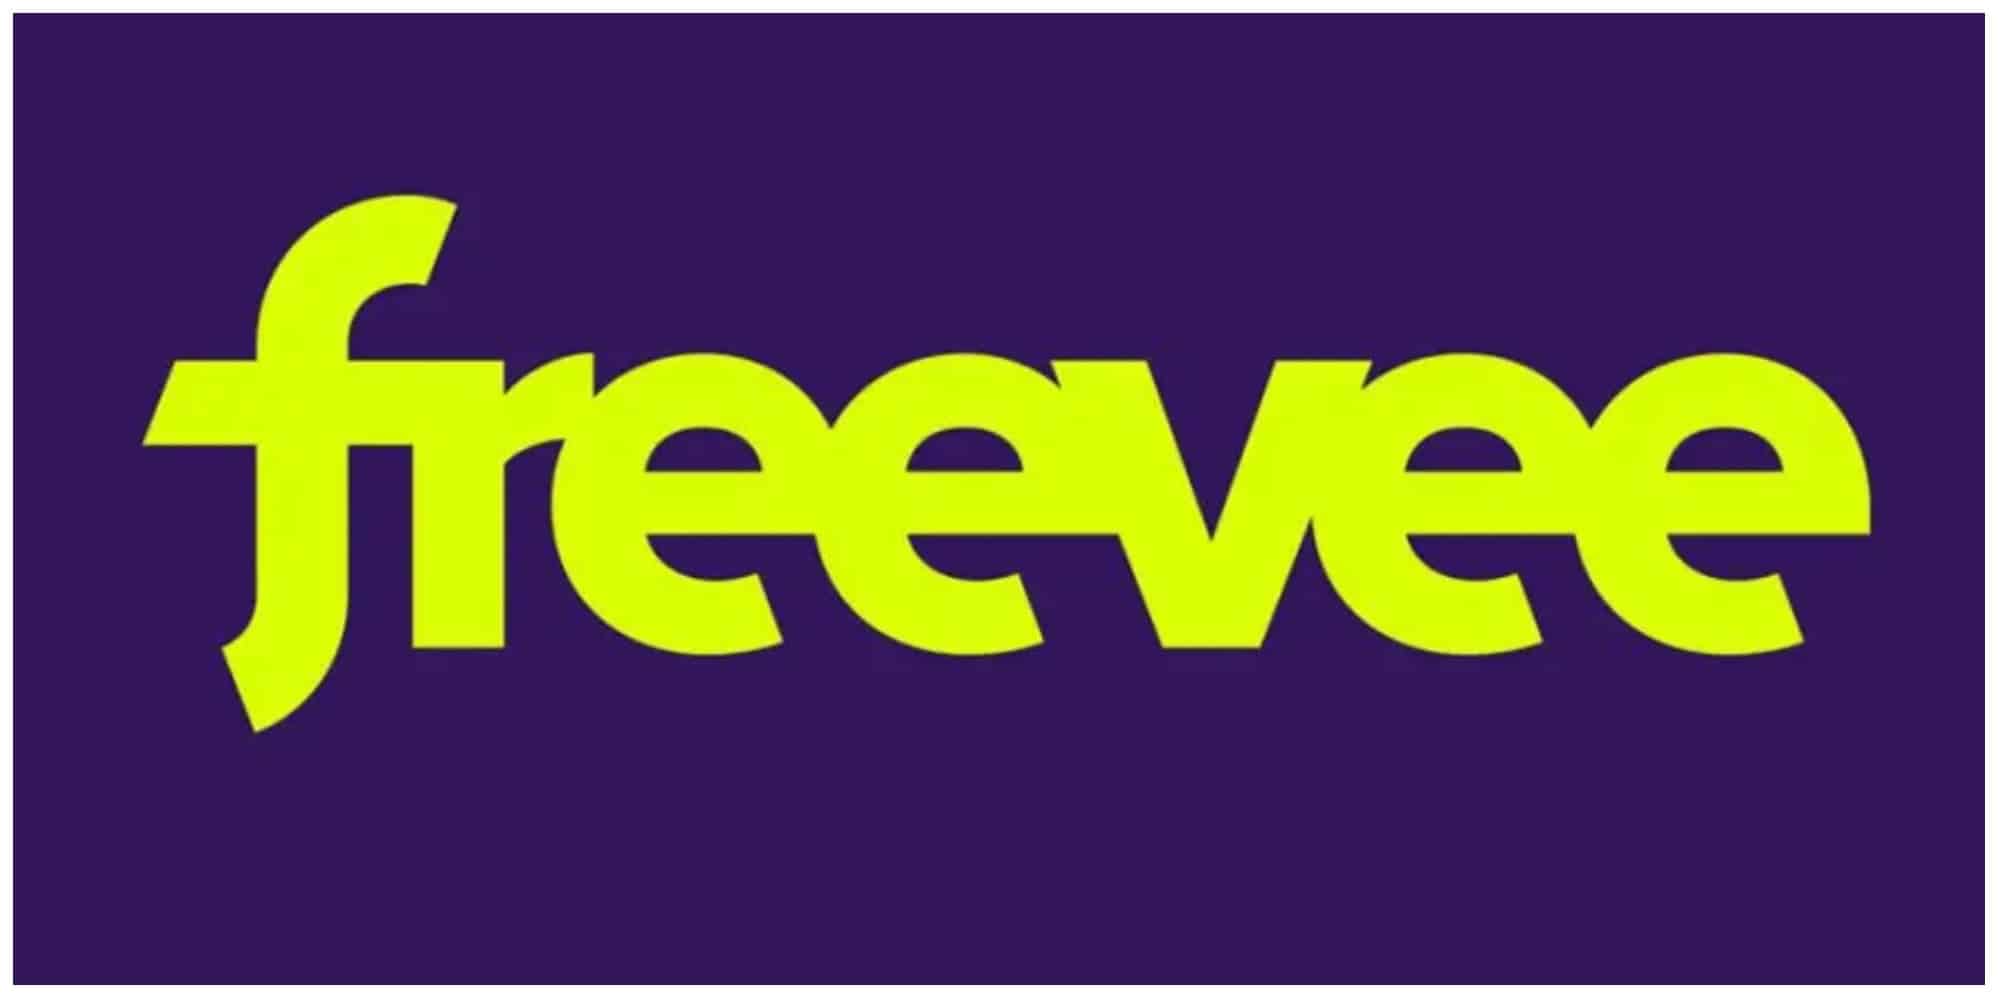 Is Freevee Really Free